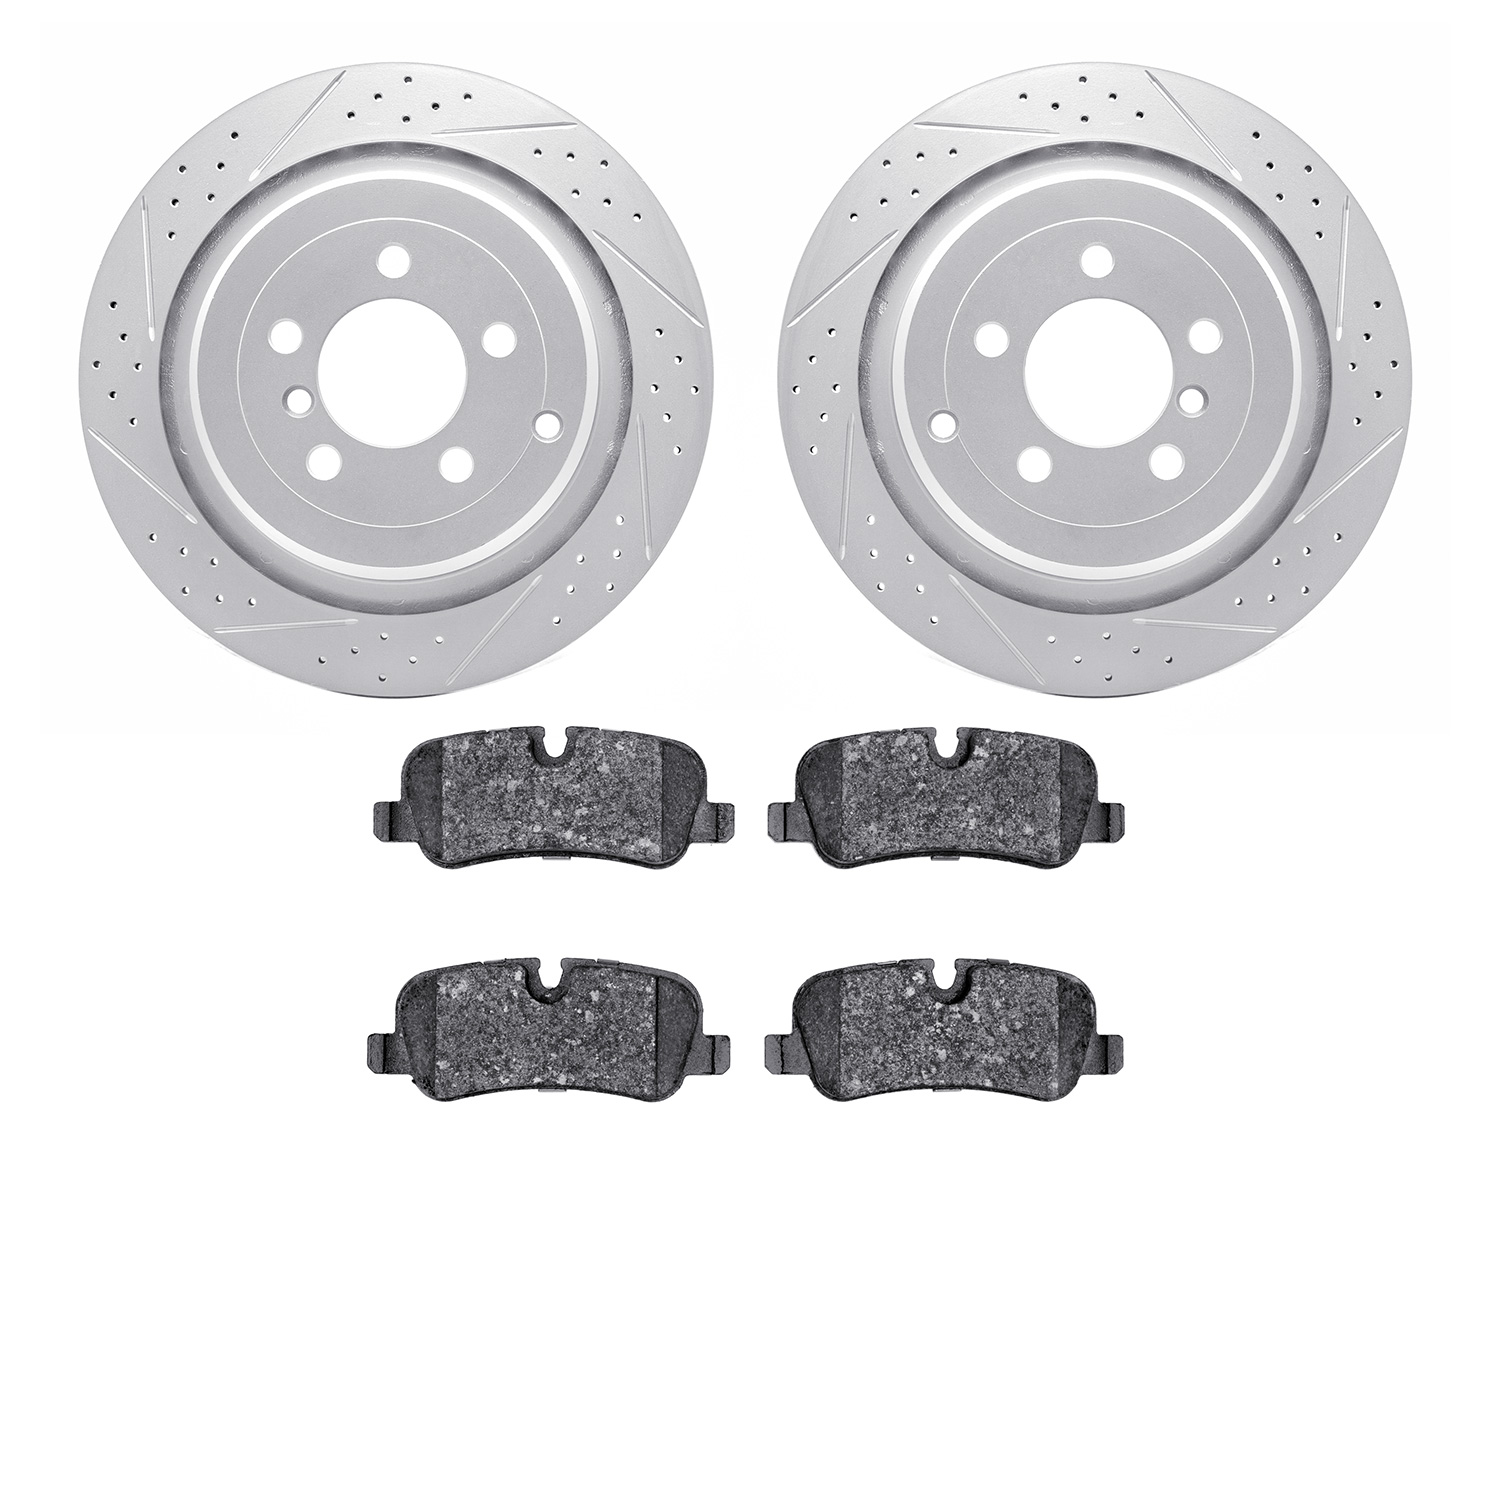 2602-11042 Geoperformance Drilled/Slotted Rotors w/5000 Euro Ceramic Brake Pads Kit, 2006-2012 Land Rover, Position: Rear